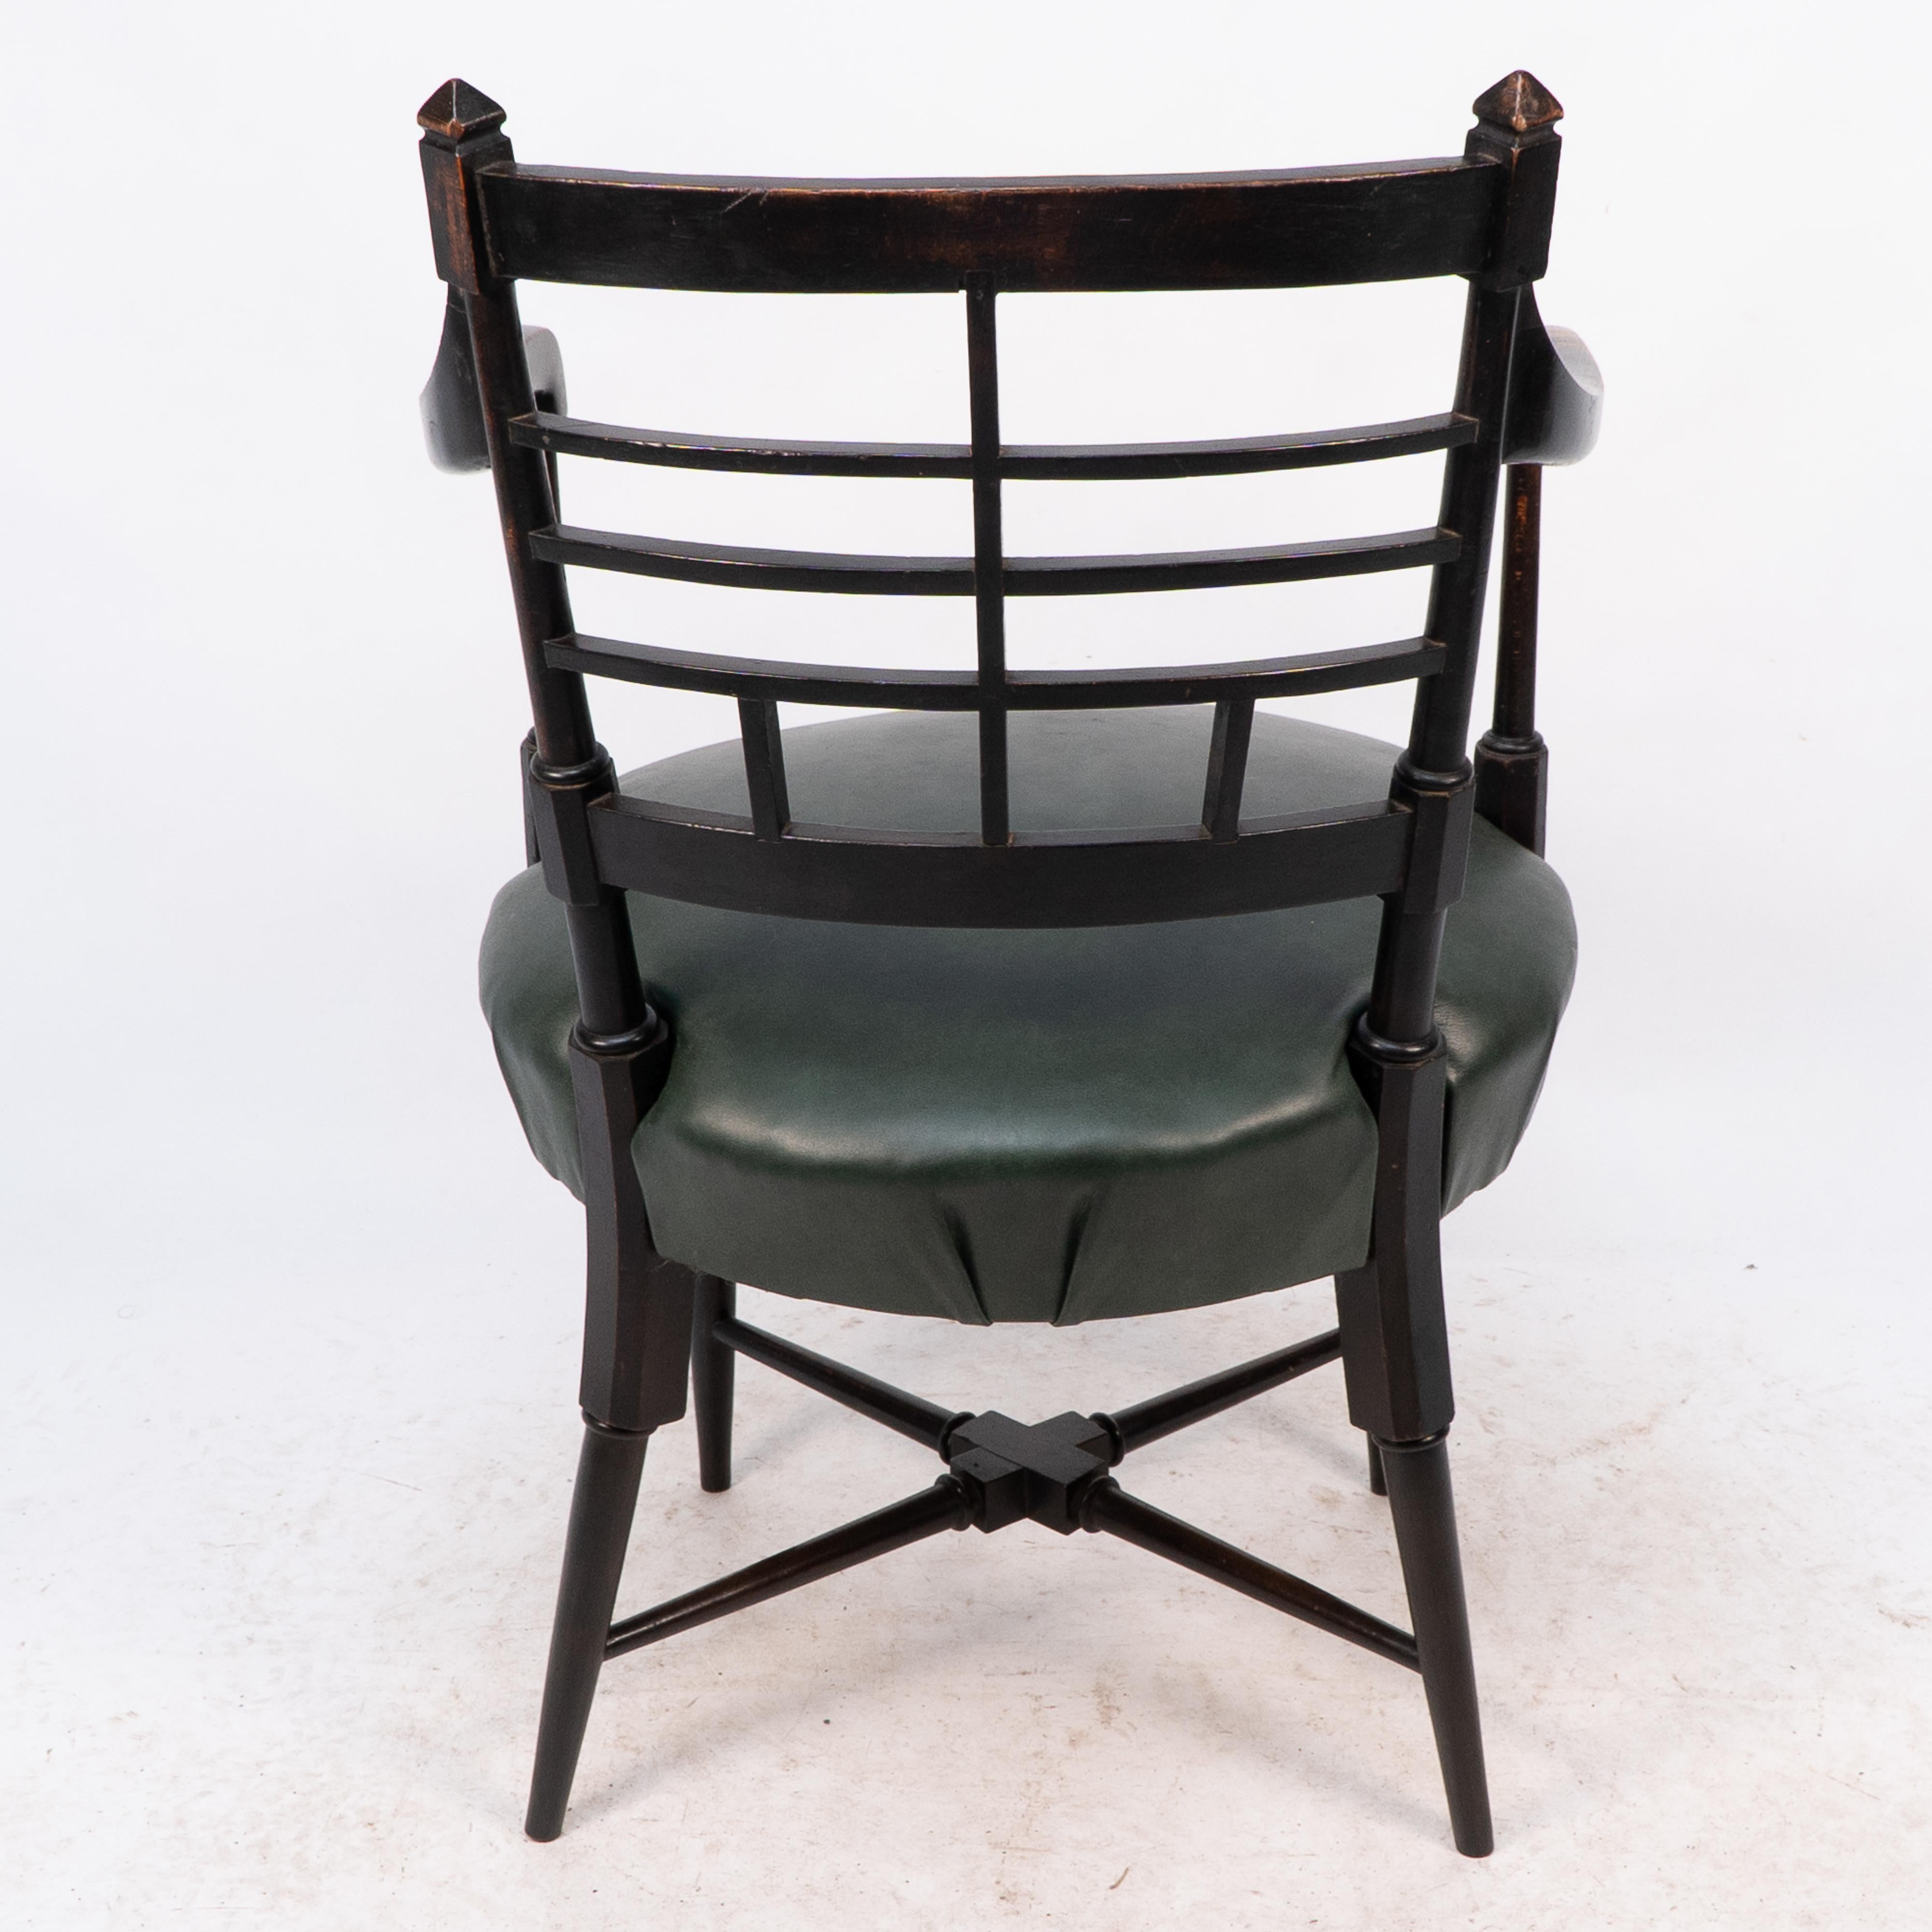 E W Godwin for William Watt. An Anglo-Japanese Old English or Jacobean armchair For Sale 8